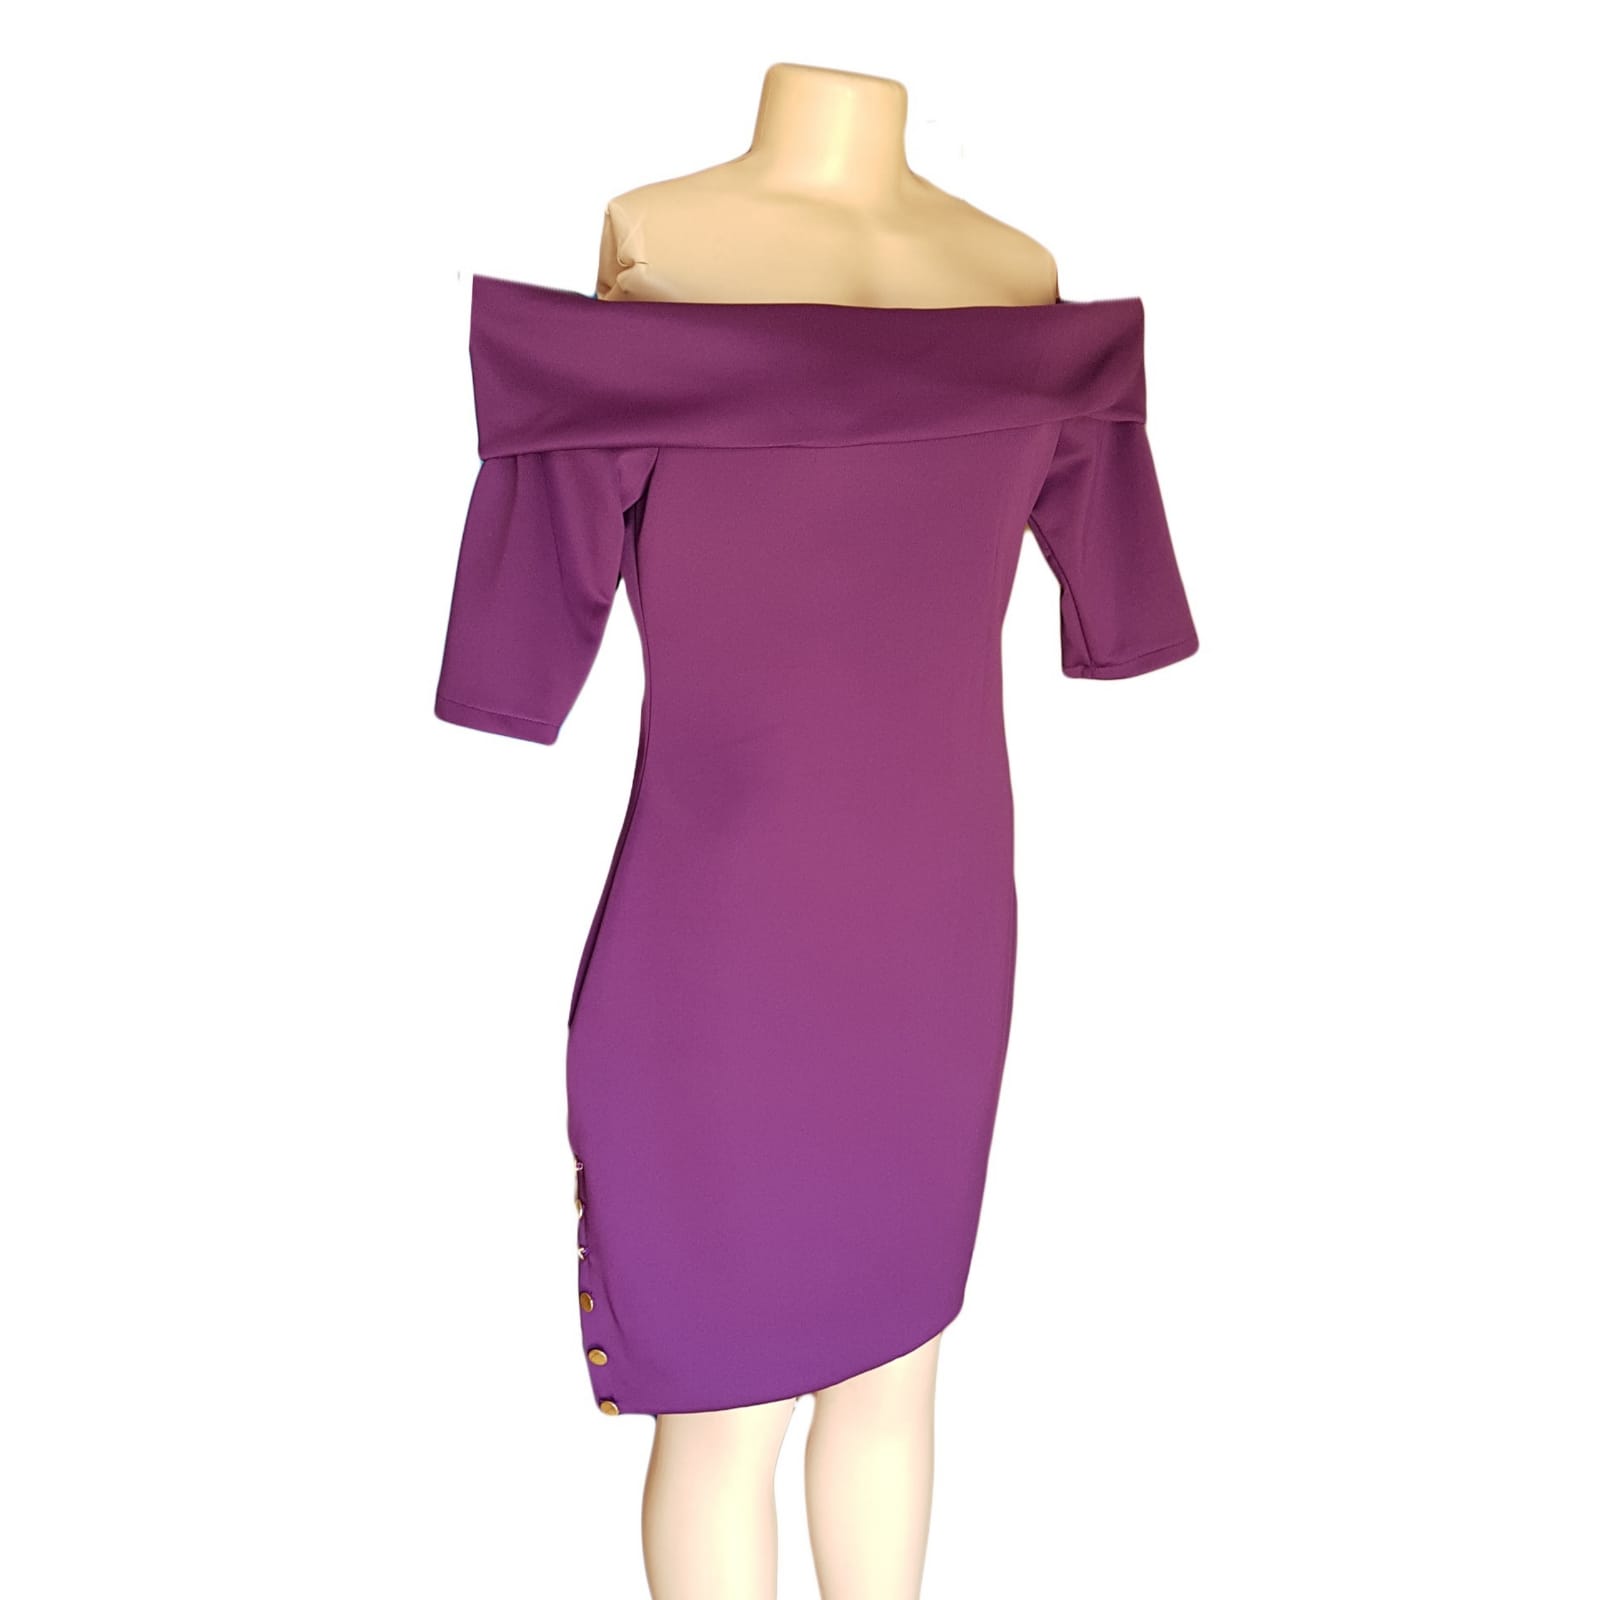 Purple knee length off shoulder smart casual dress 3 purple knee length off shoulder smart casual dress with 3/4 sleeves and a side slit detailed with gold buttons